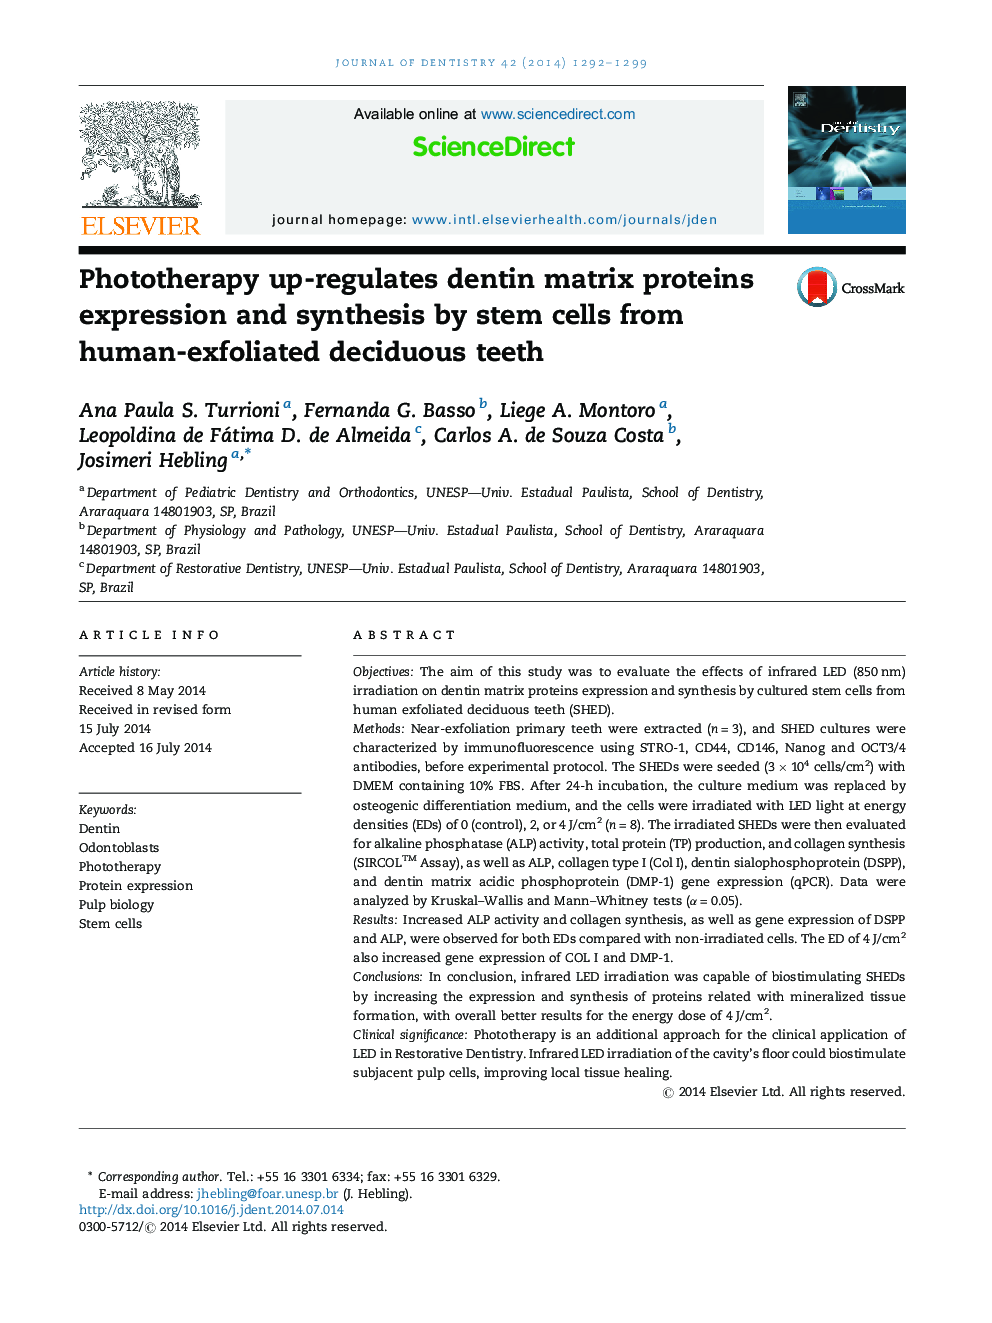 Phototherapy up-regulates dentin matrix proteins expression and synthesis by stem cells from human-exfoliated deciduous teeth